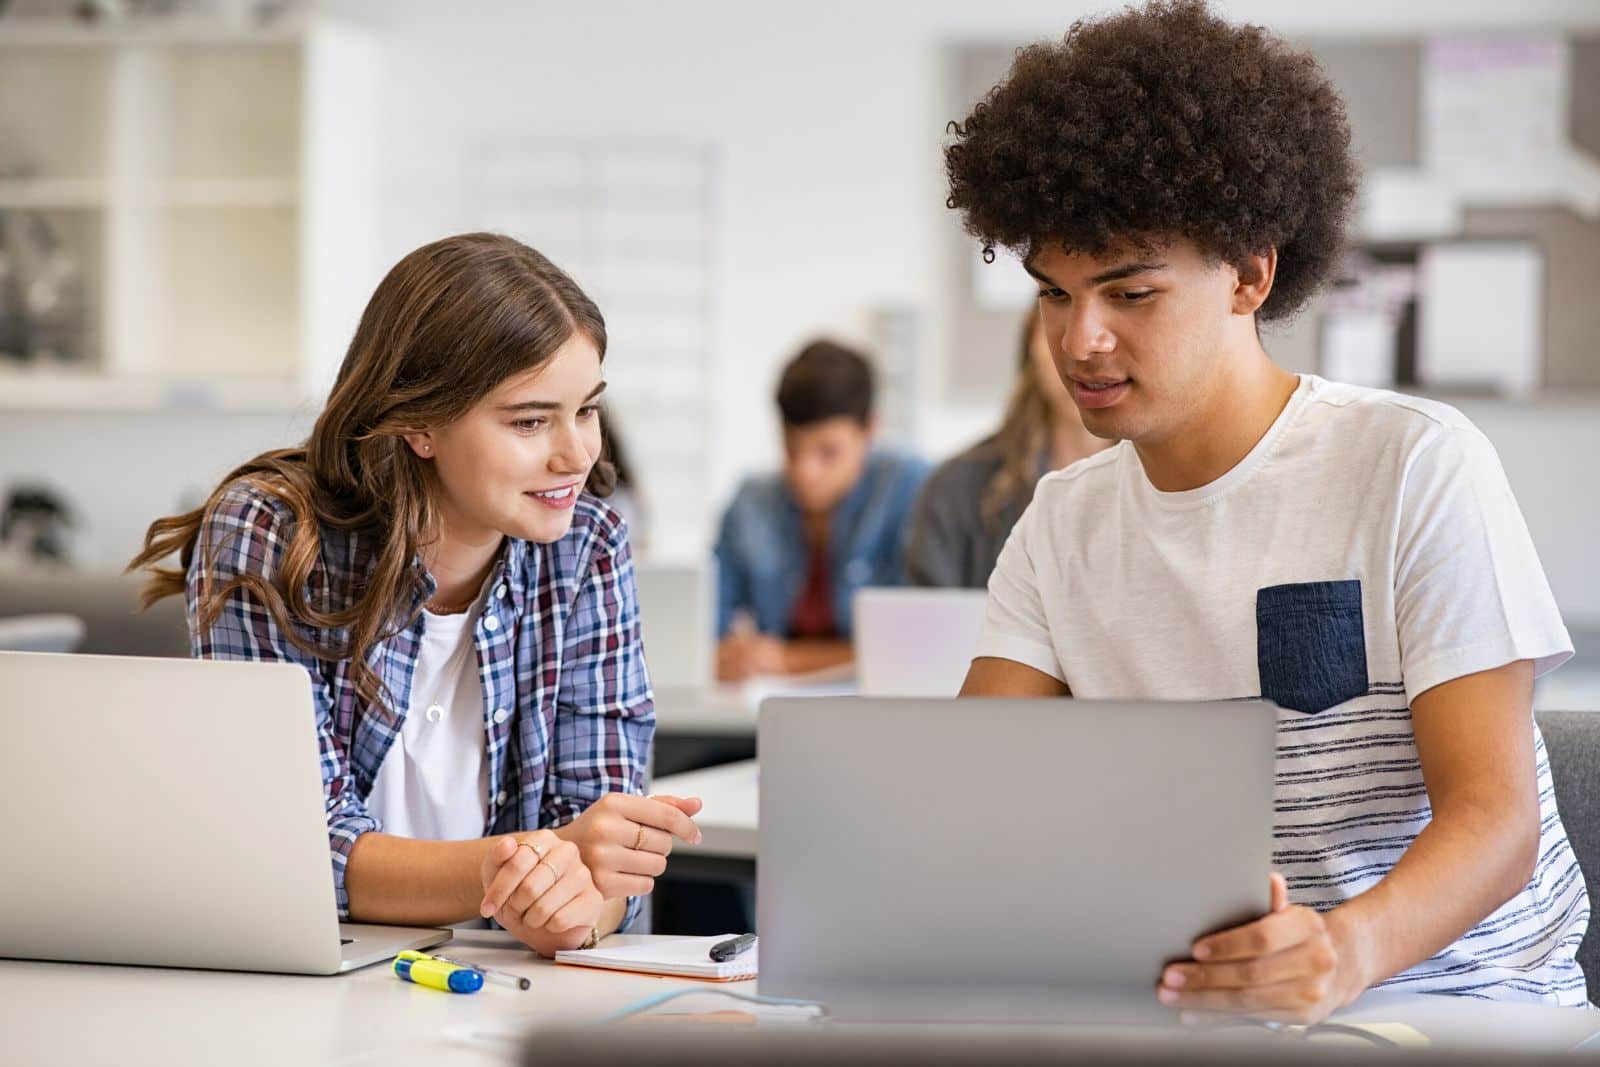 Teenagers in a classroom sharing a table. A girl with long brown hair in a plaid shirt is leaning across her open laptop to a boy with black hair in a white shirt with blue stripes. The boy is pointing to something on his open laptop.